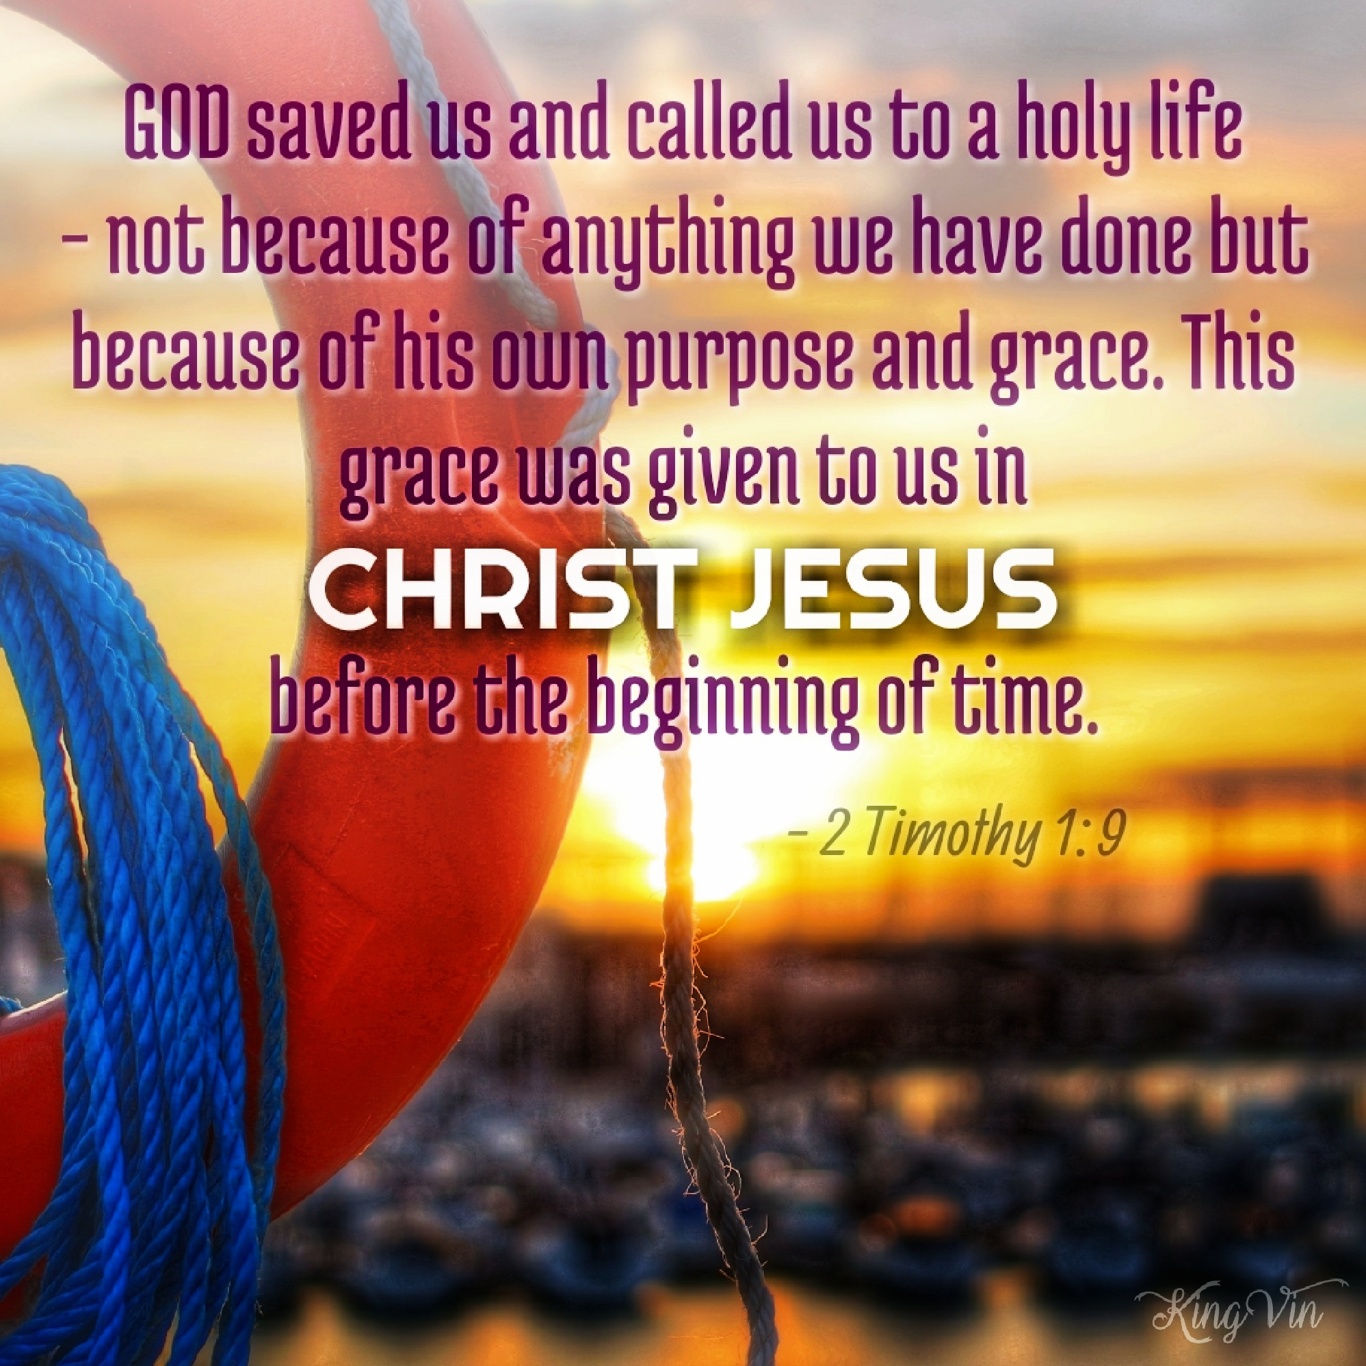 God saved us and called us to a holy life – not because of anything we have done but because of his own purpose and grace. This grace was given to us in Christ Jesus before the beginning of time. 2 Timothy 1:9